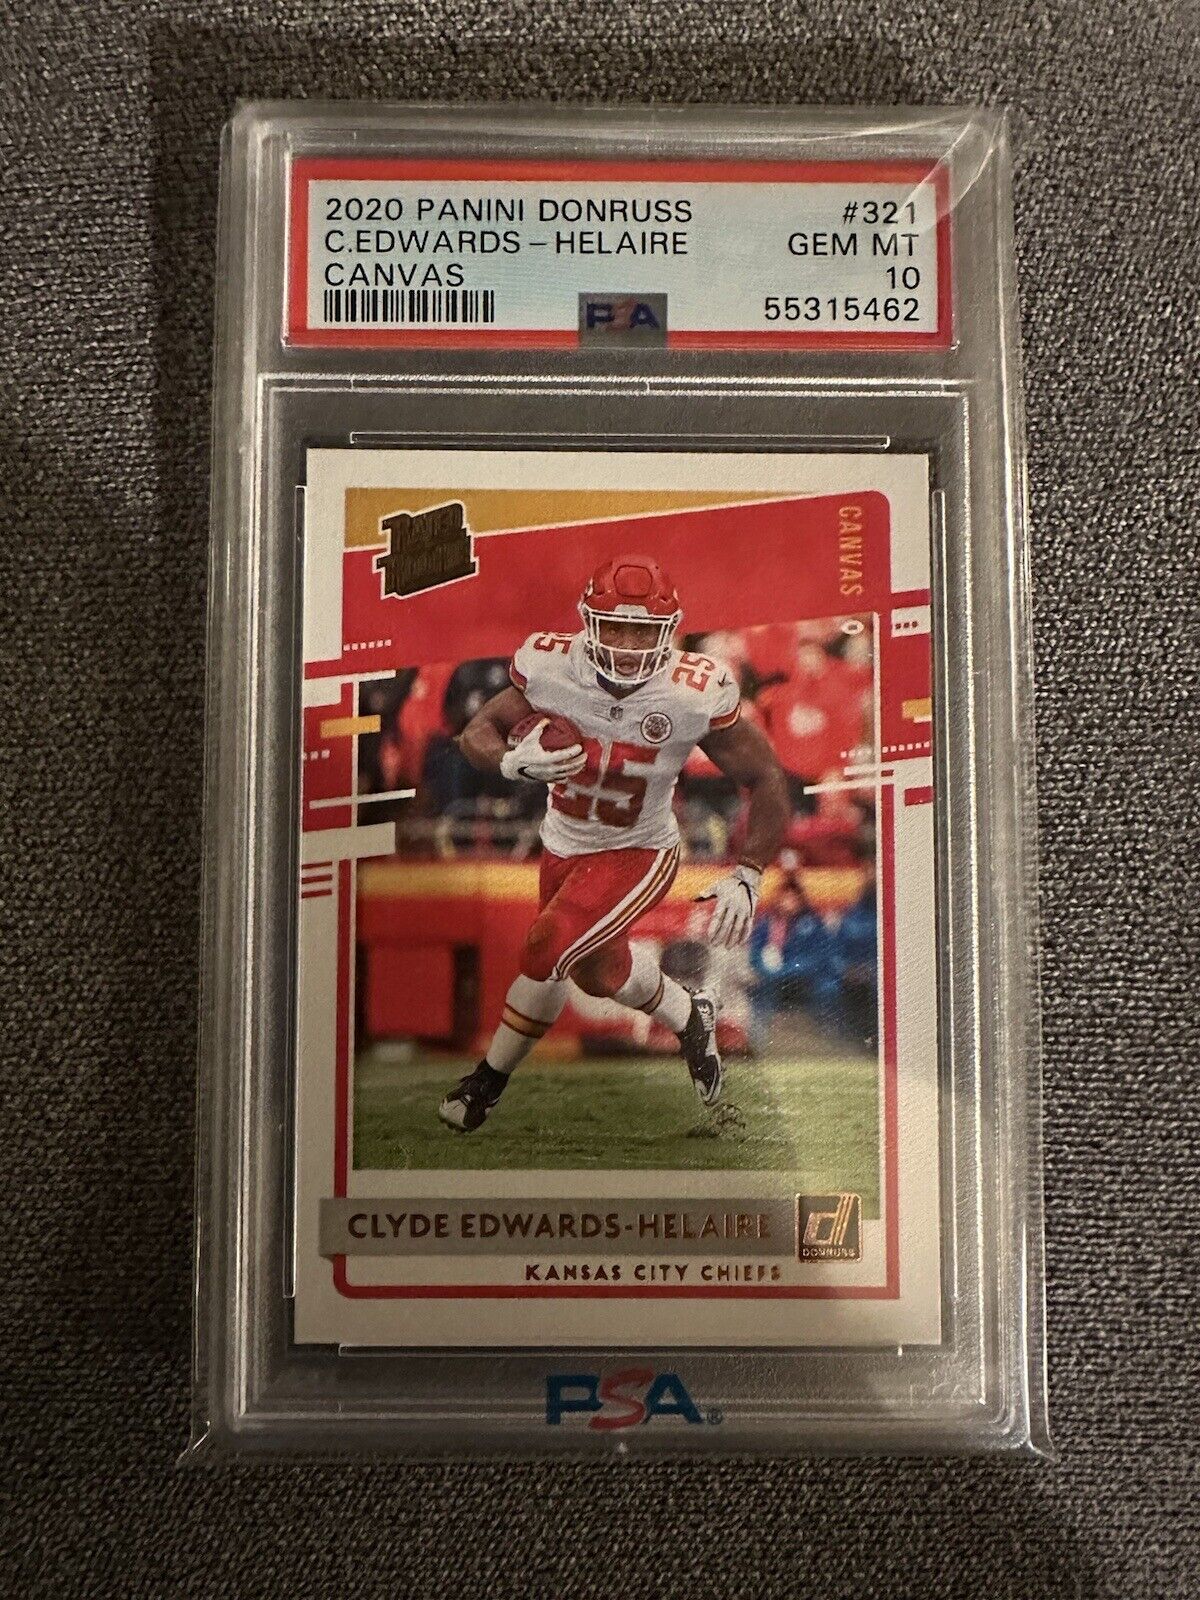 2020 Panini Donruss Clyde Edwards-Helaire Rated Rookie Canvas #321 PSA 10